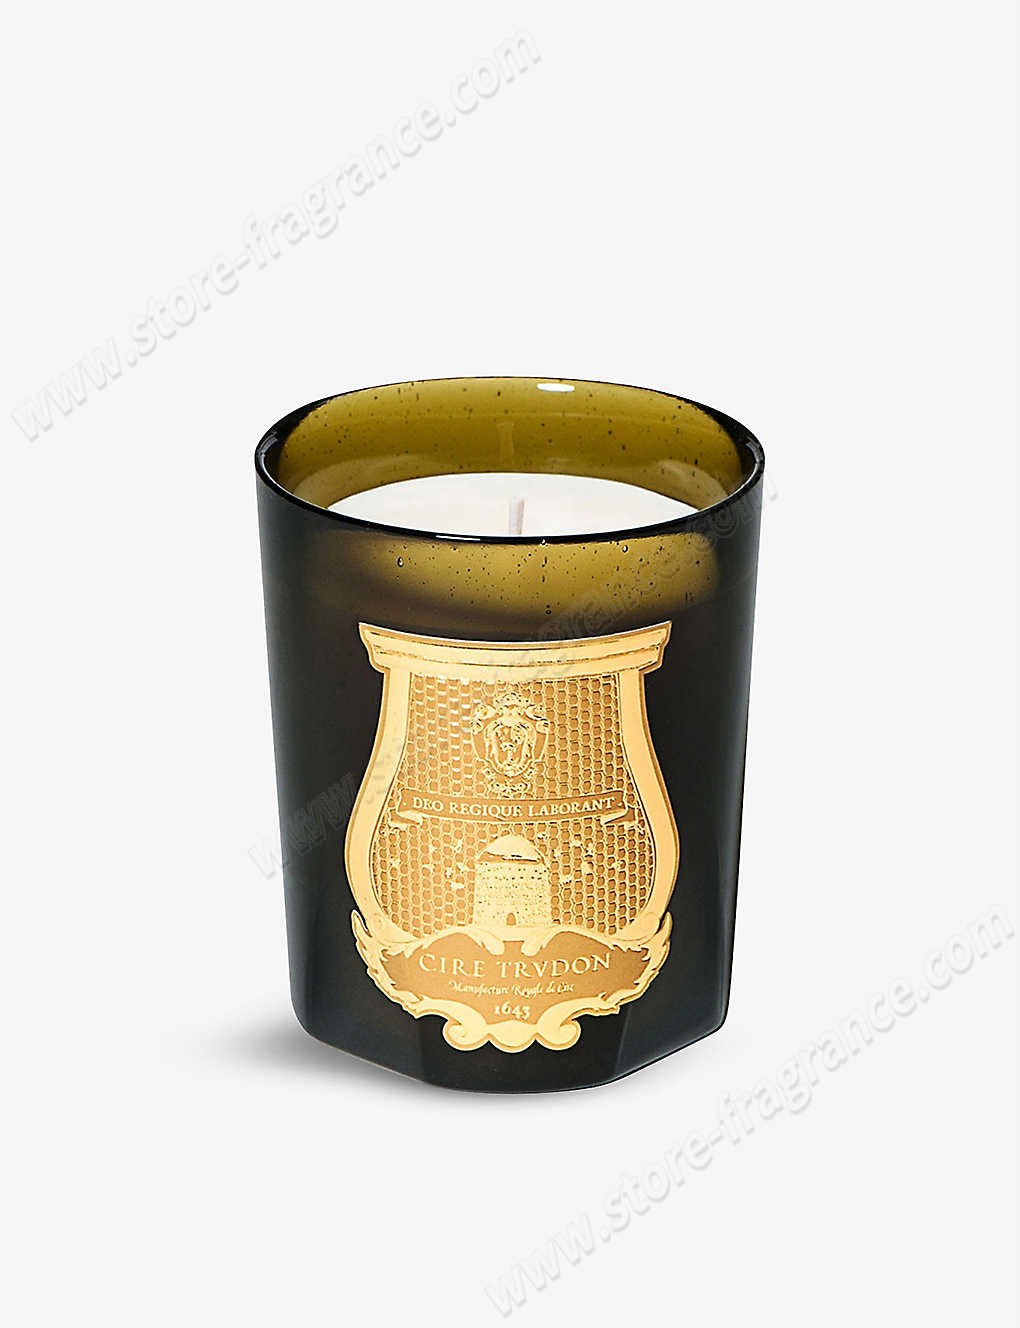 CIRE TRUDON/Cyrnos scented candle 270g ✿ Discount Store - CIRE TRUDON/Cyrnos scented candle 270g ✿ Discount Store